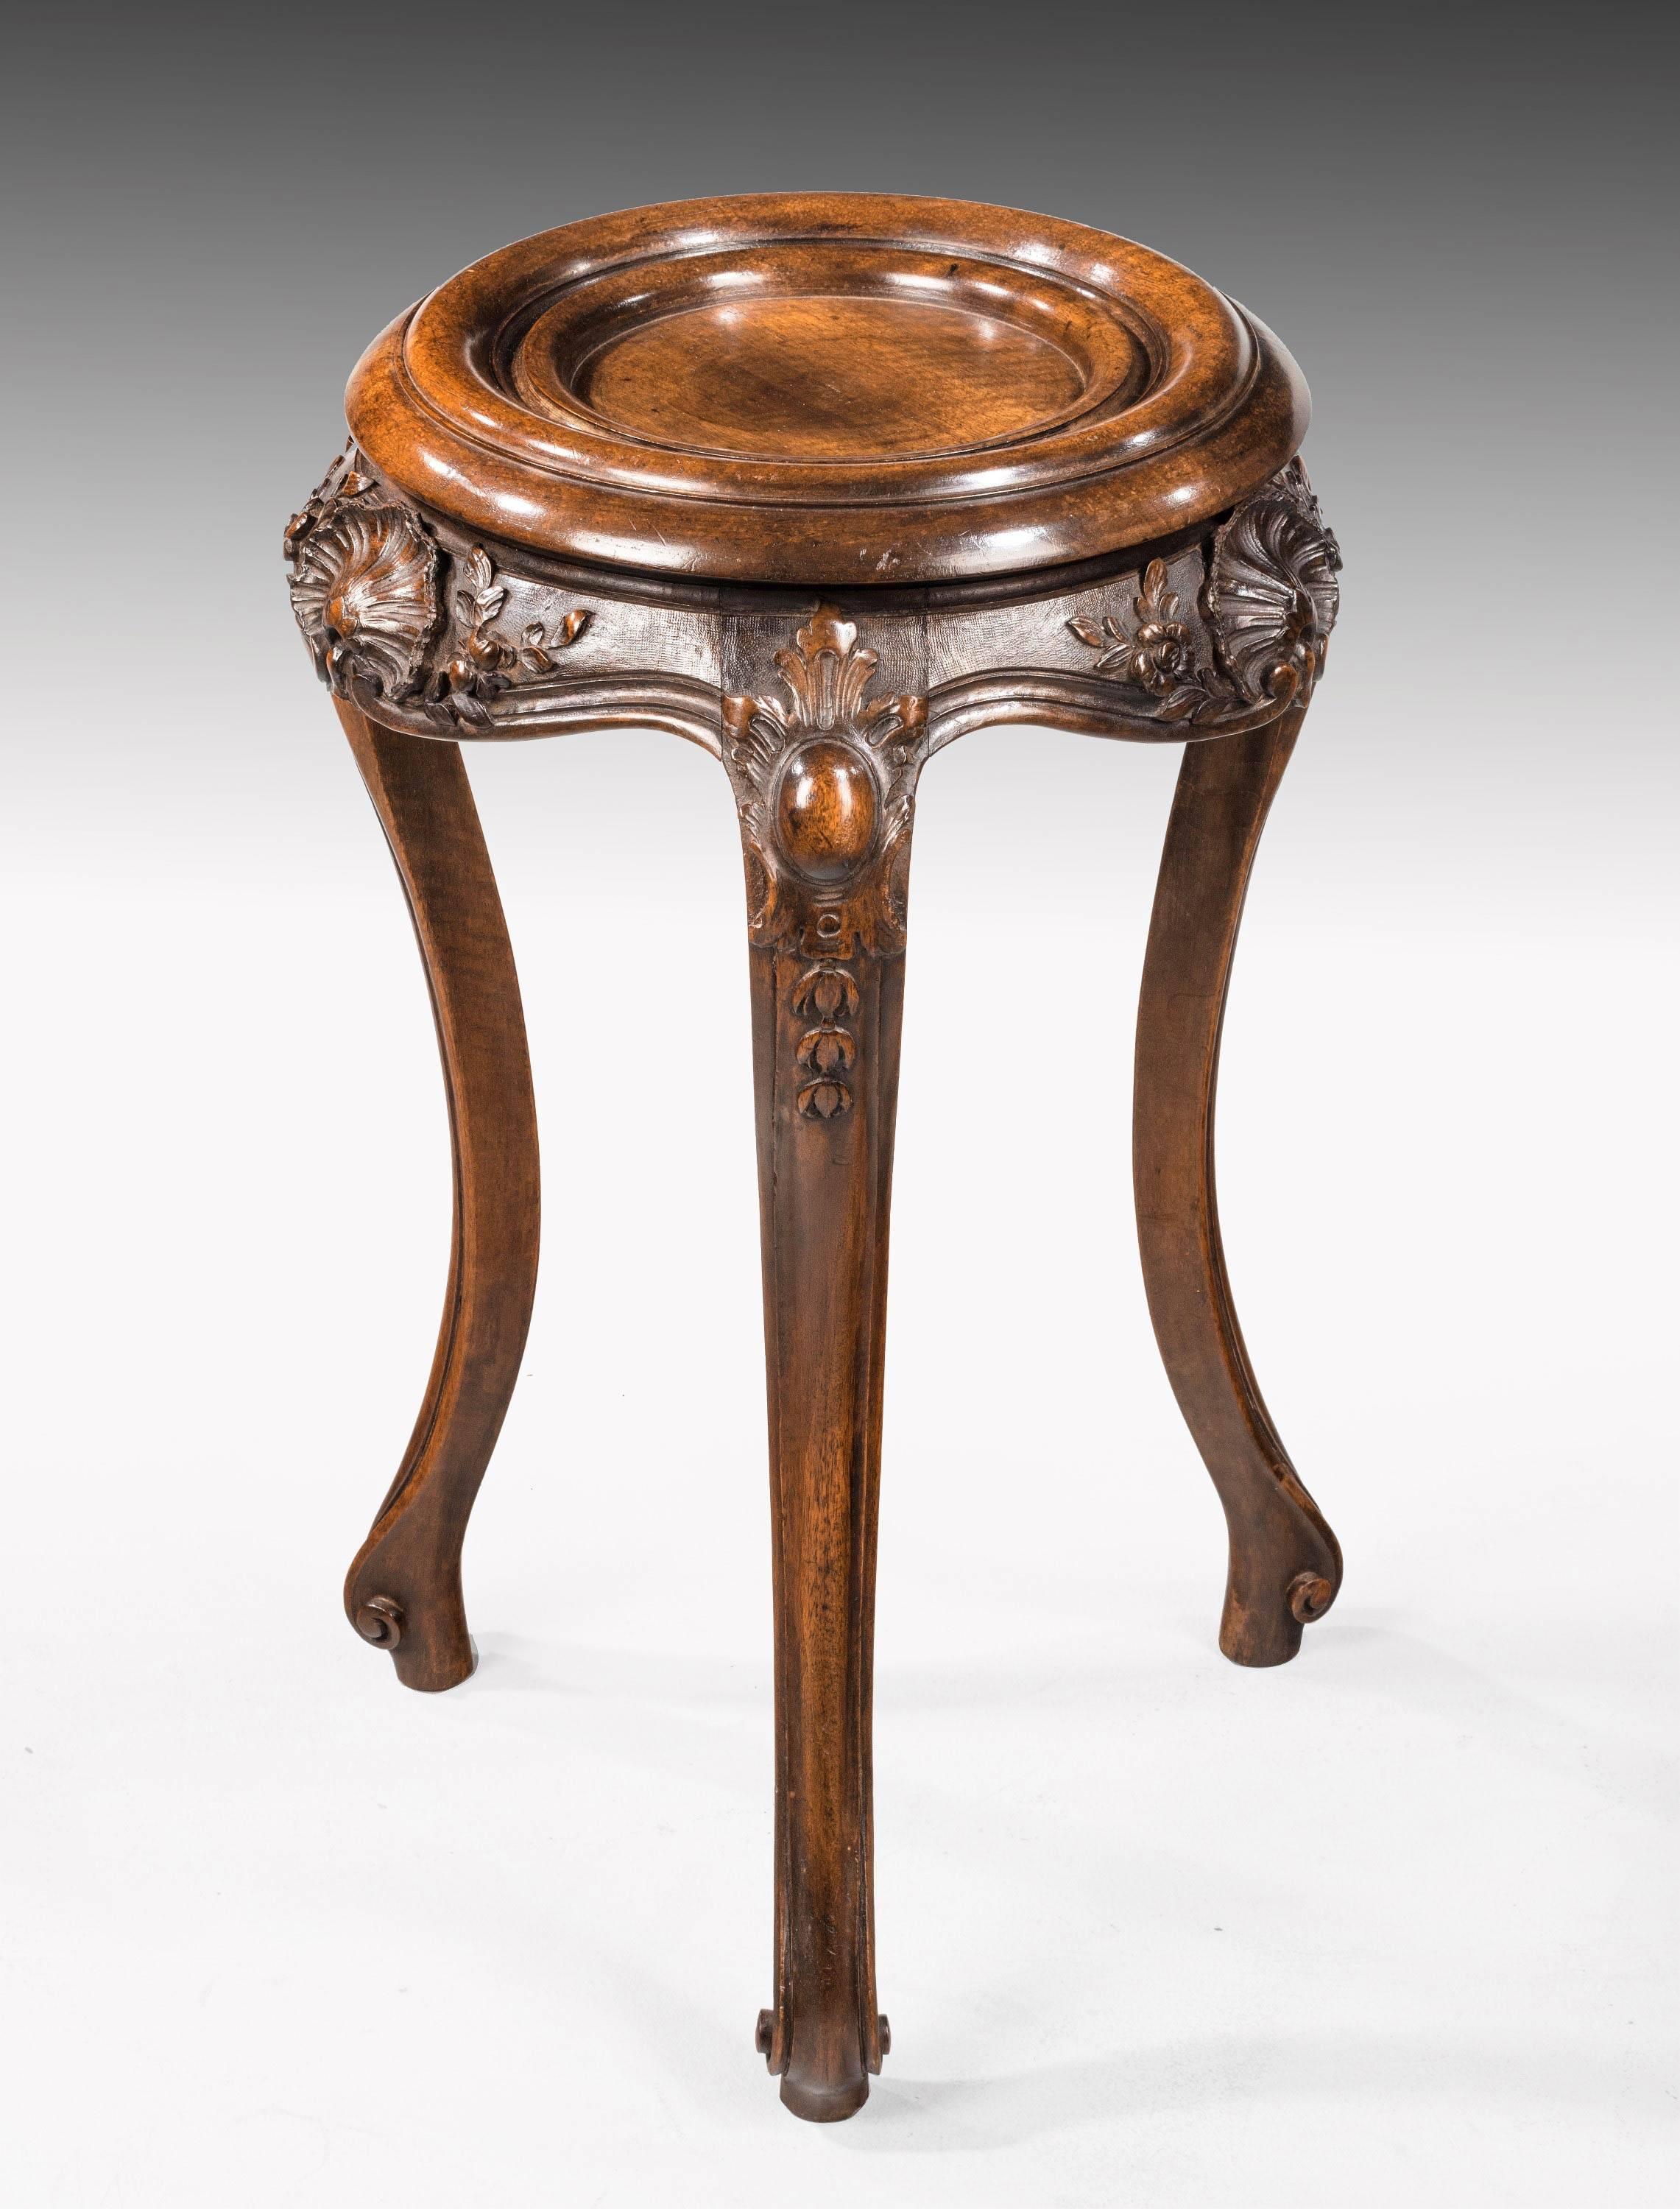 A finely carved pair of mid-19th century walnut bowl or vase stands. Very crisply defined shell details. Cabriole supports terminating in a semi scroll foot.